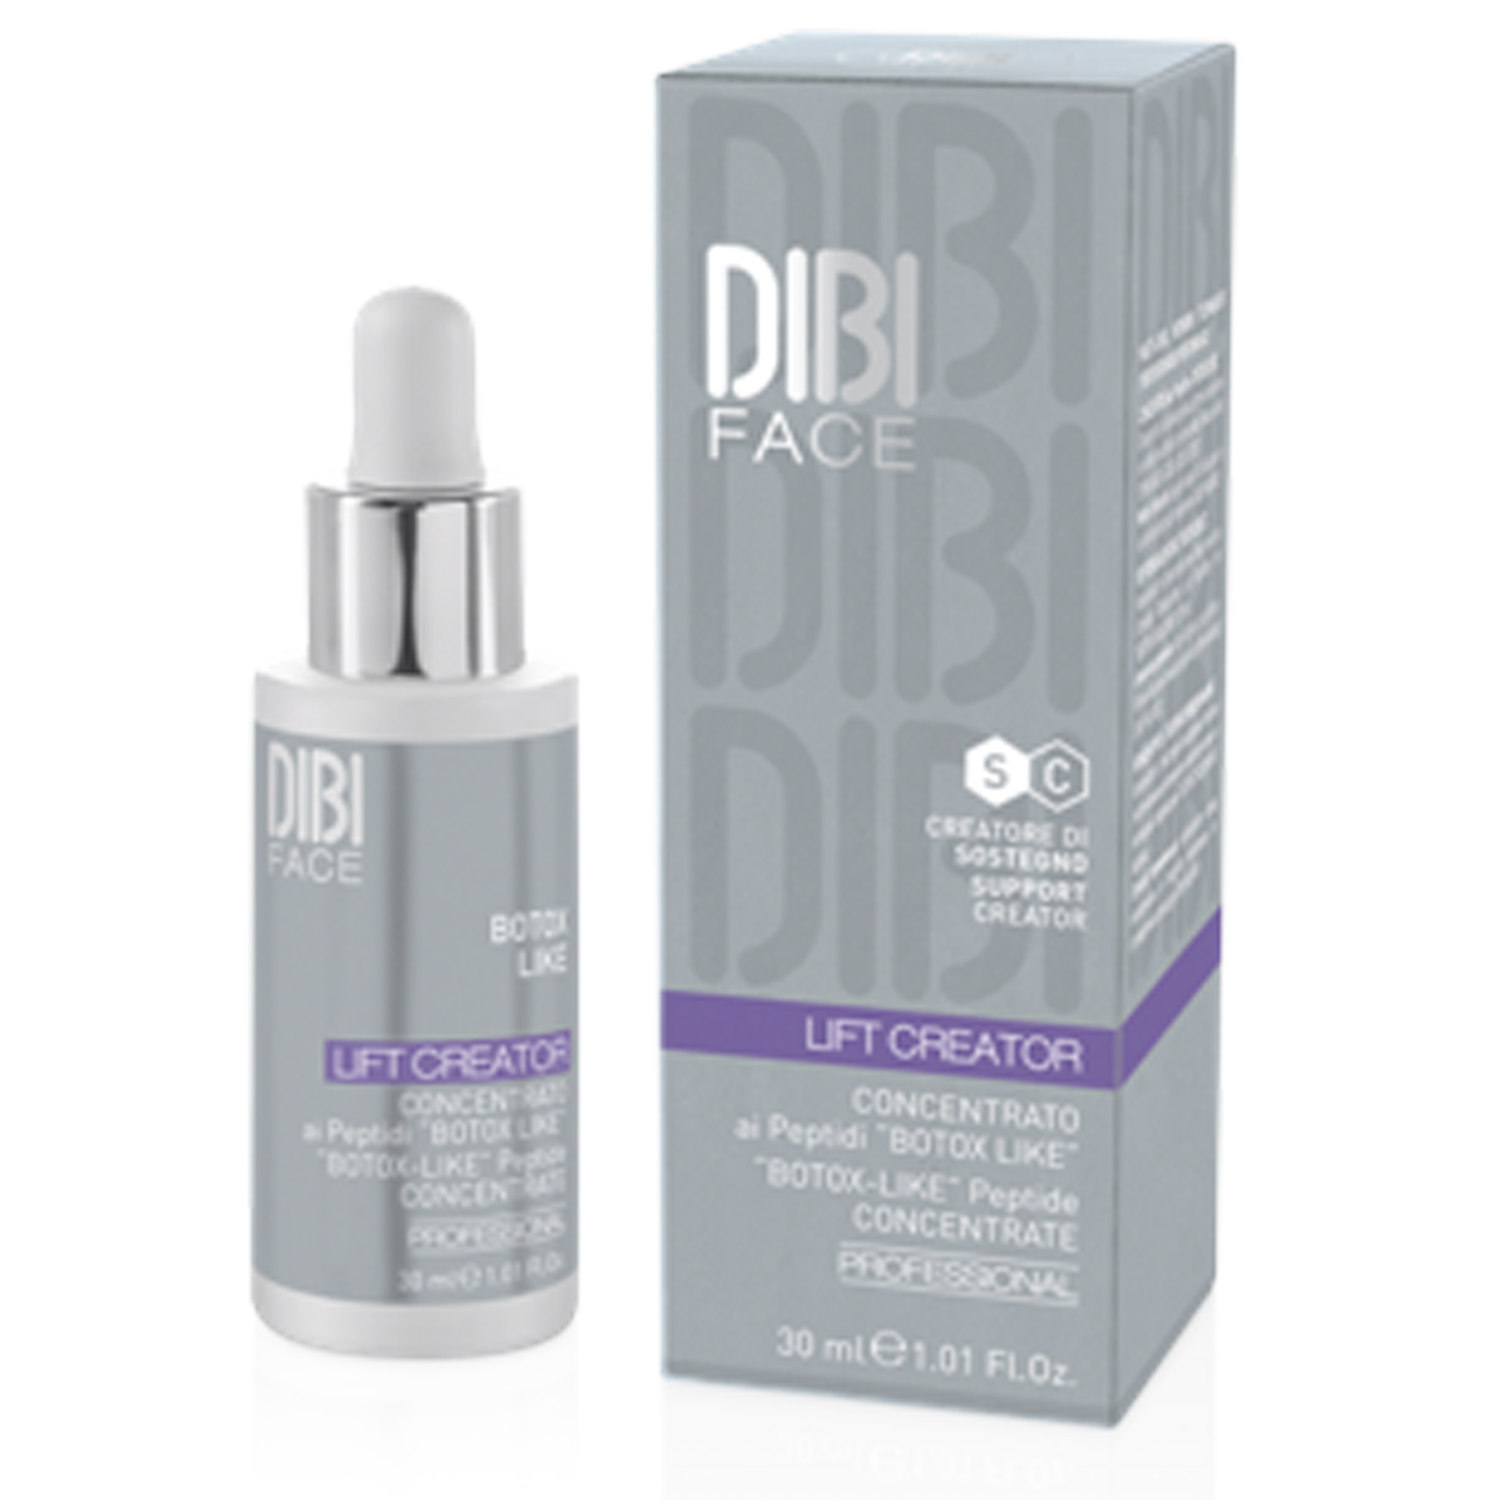 LIFT CREATOR Botox-like Peptides Concentrate 30 ml